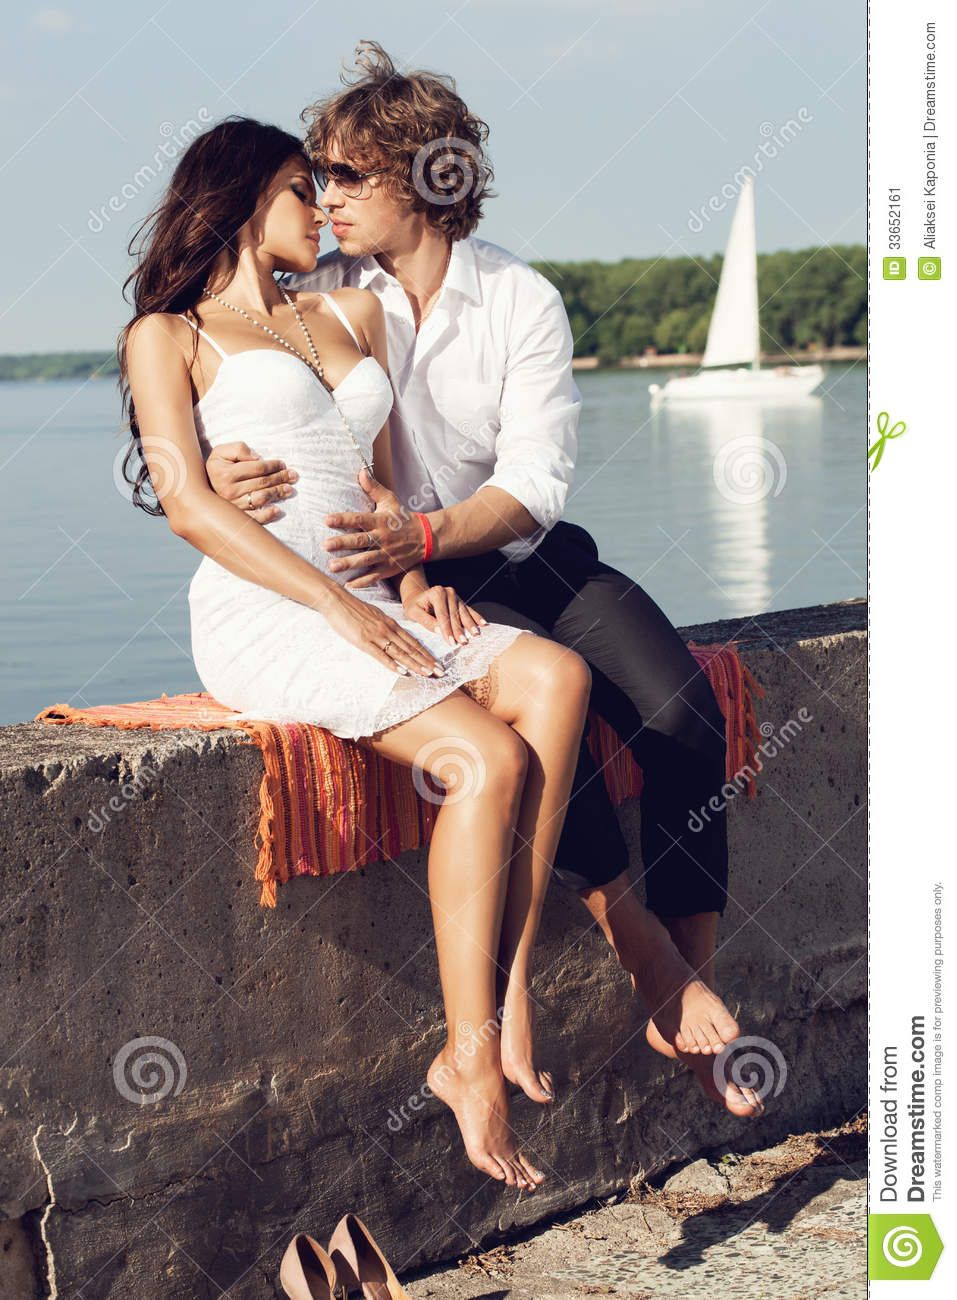 Sexy hot love couple photo download